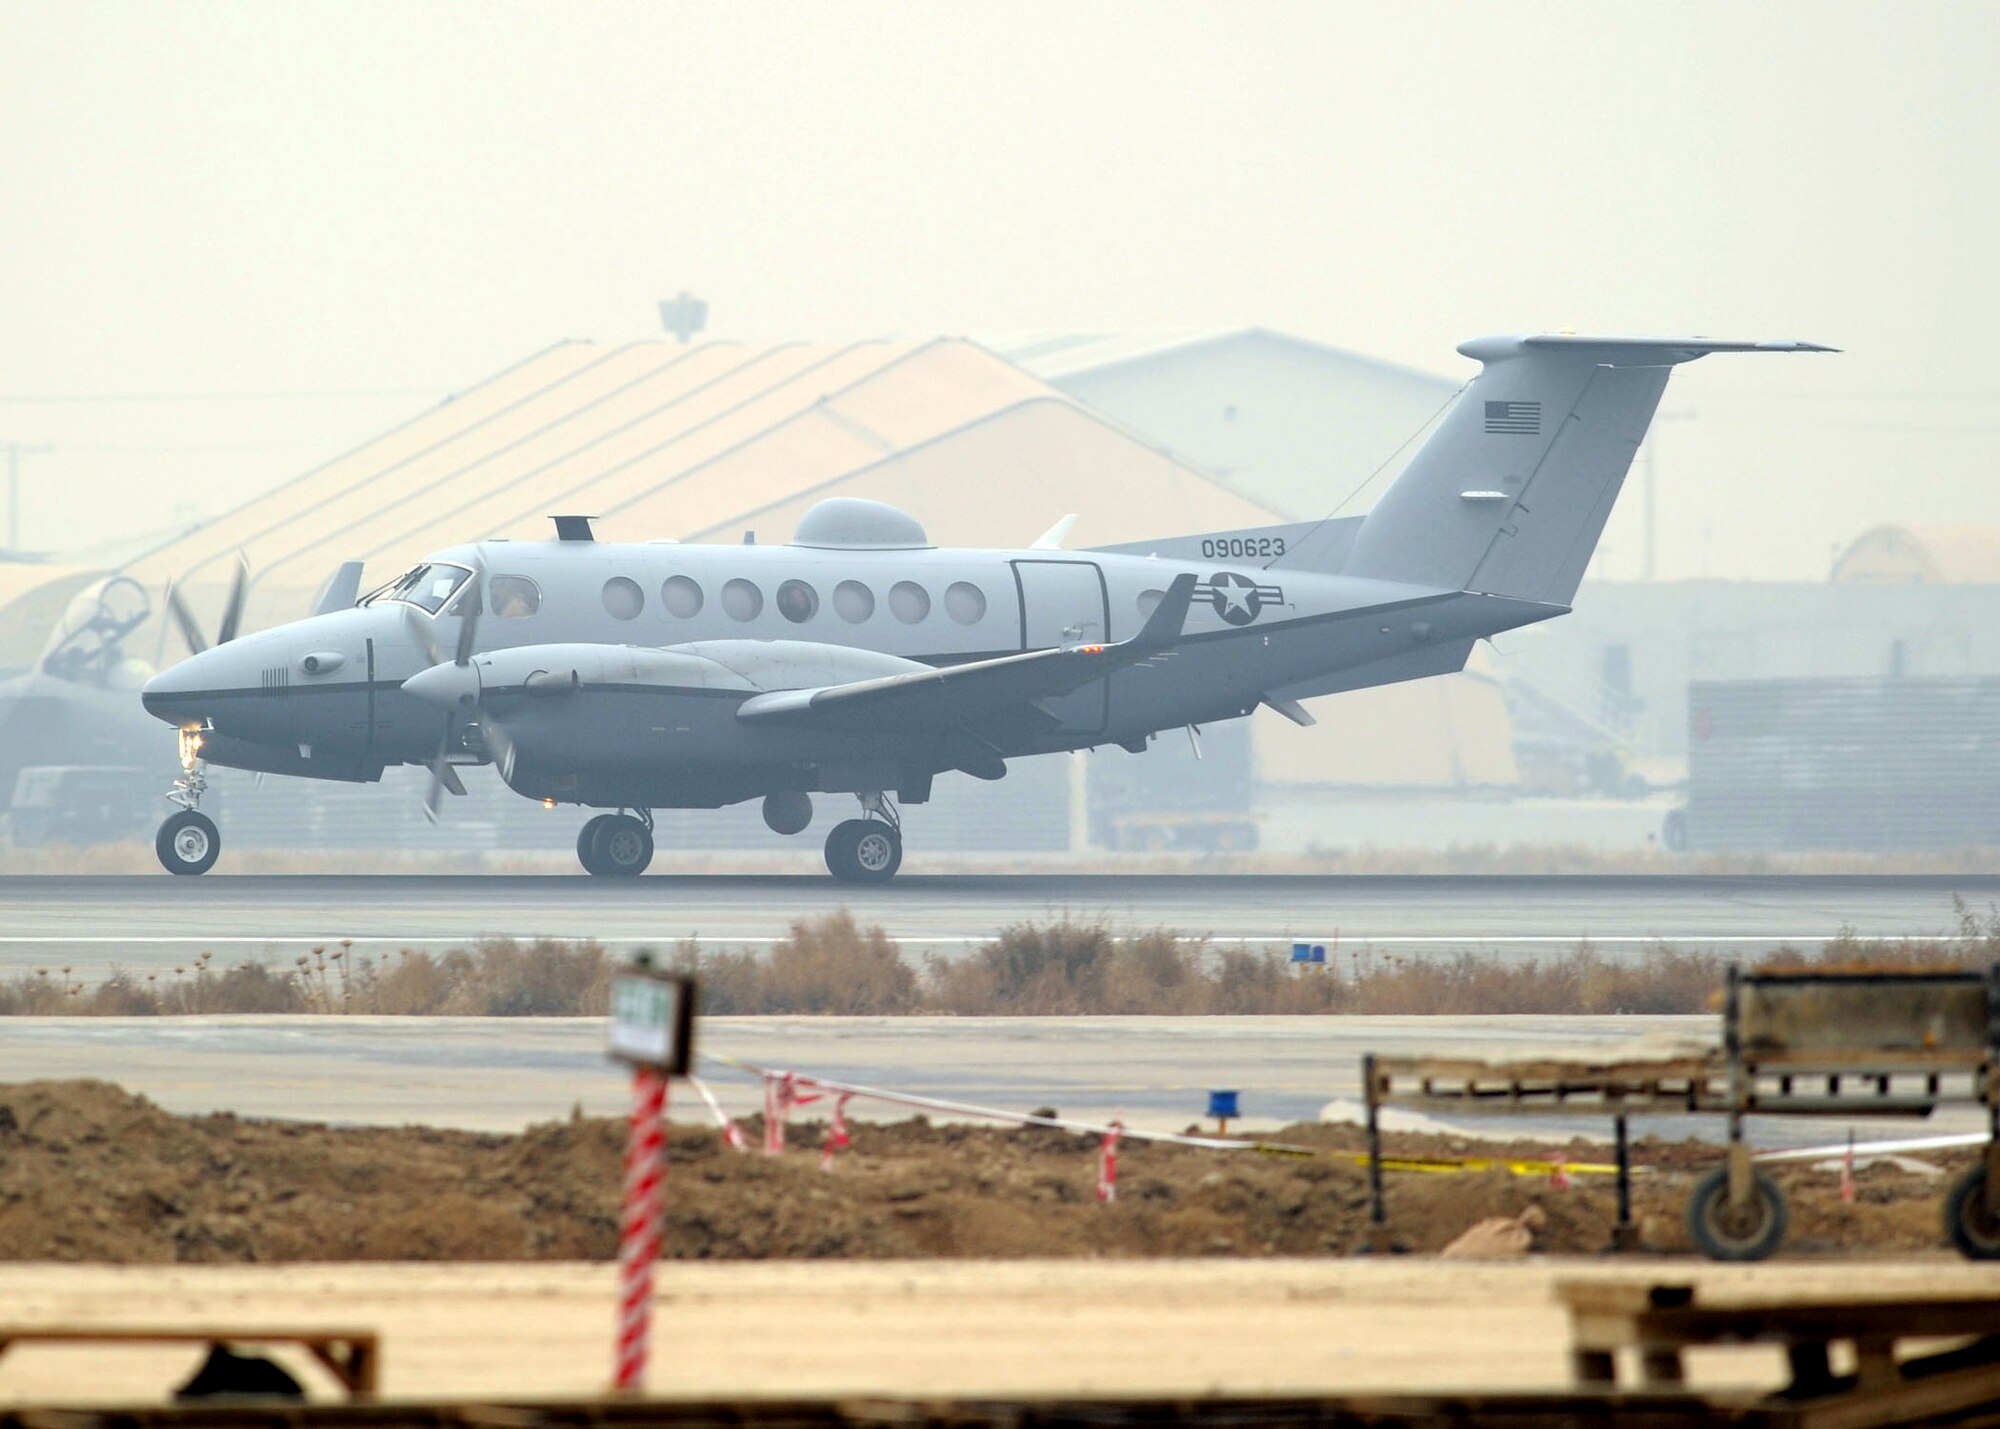 A MC-12 landed at Bagram Airfield, Afghanistan, Dec. 27, 2009, bringing another capability to Operation Enduring Freedom. The MC-12 is not just an aircraft, but a complete collection, processing, analysis and dissemination system. (U.S. Air Force photo/Senior Airman Felicia Juenke)